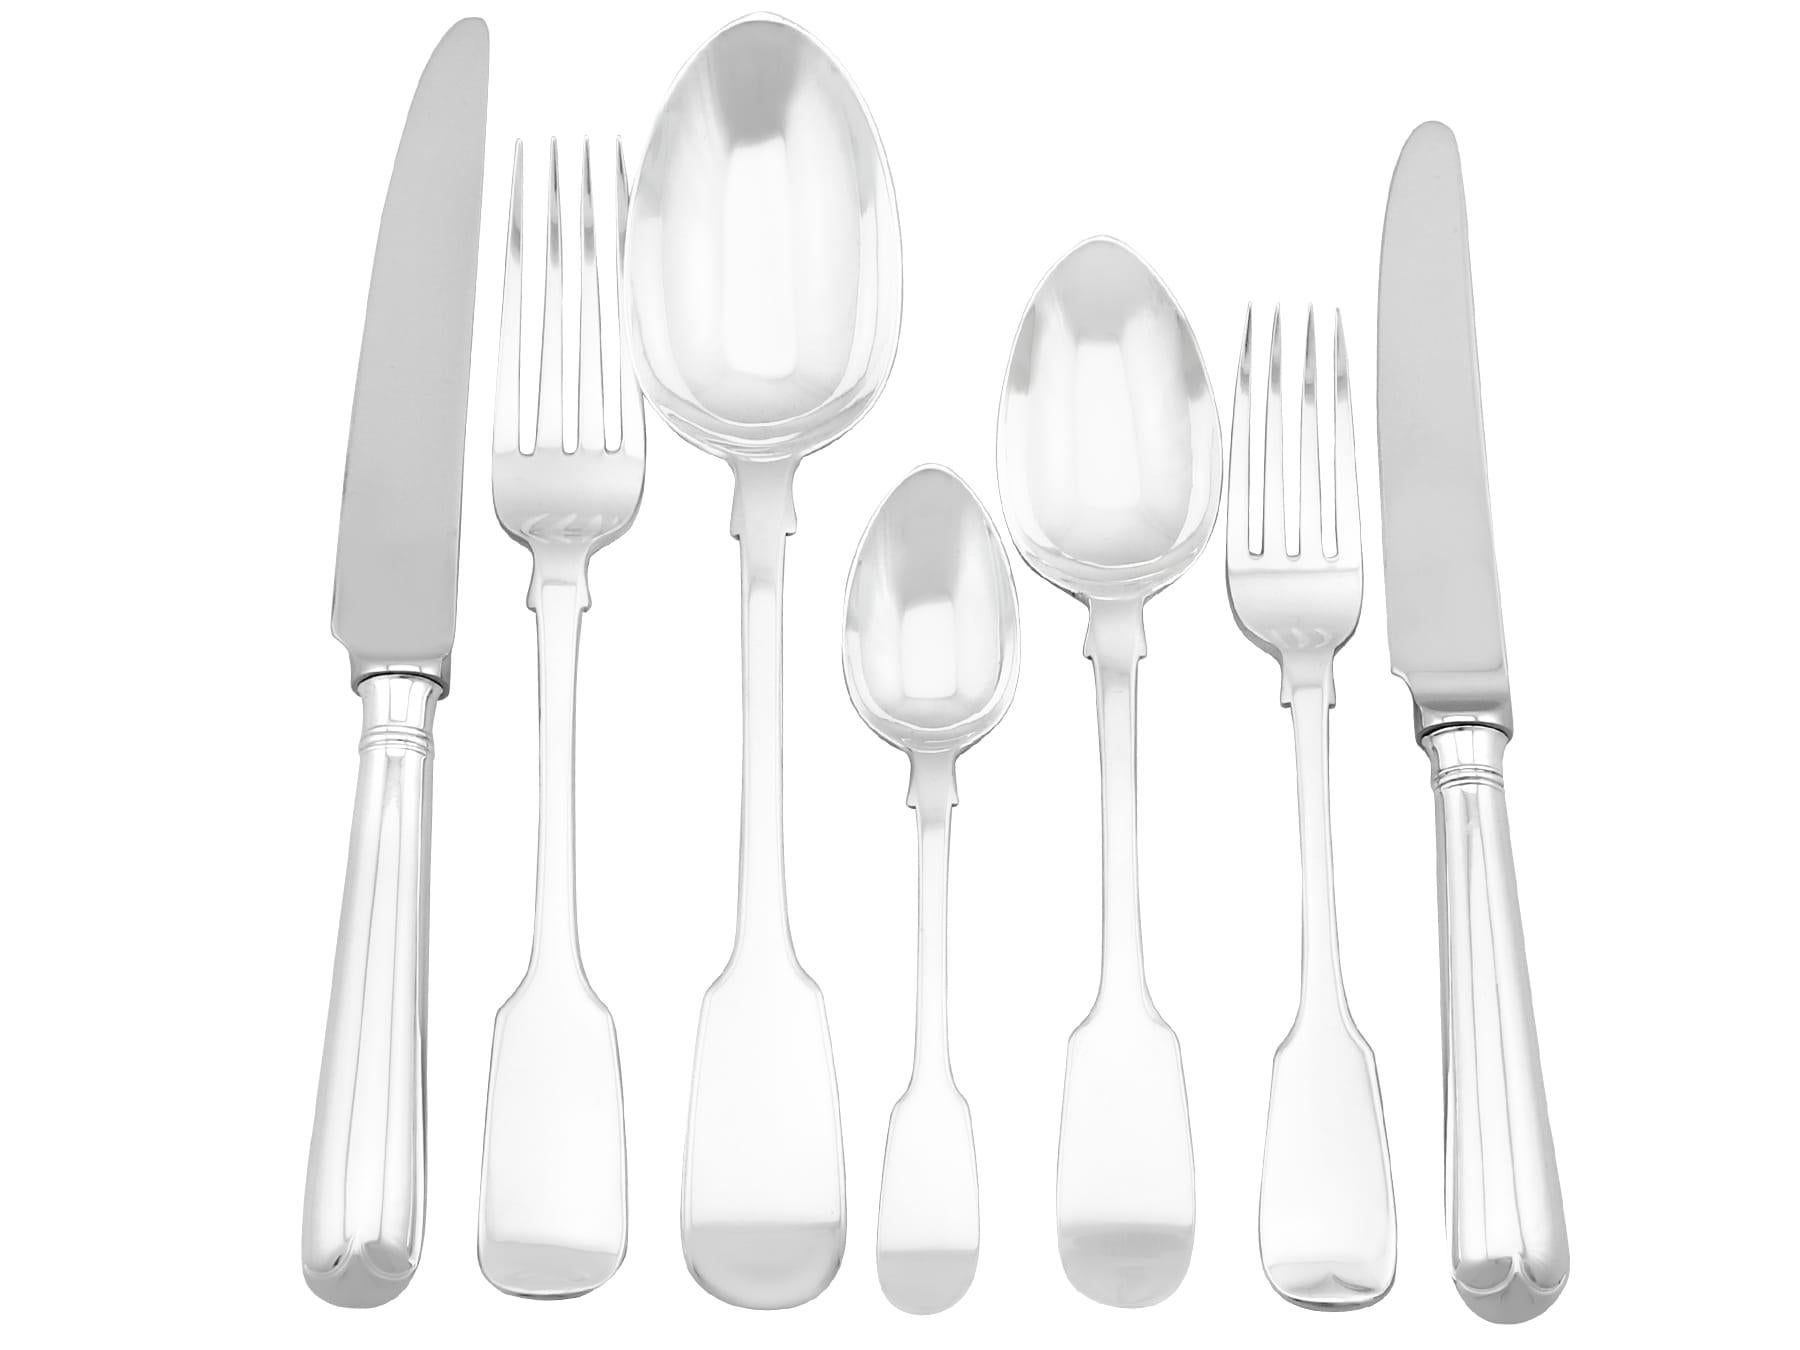 A fine and impressive antique Victorian English sterling silver composite Fiddle pattern flatware service for twelve persons; an addition to our silver cutlery collection.

The pieces of this exceptional, antique Victorian composite sterling silver